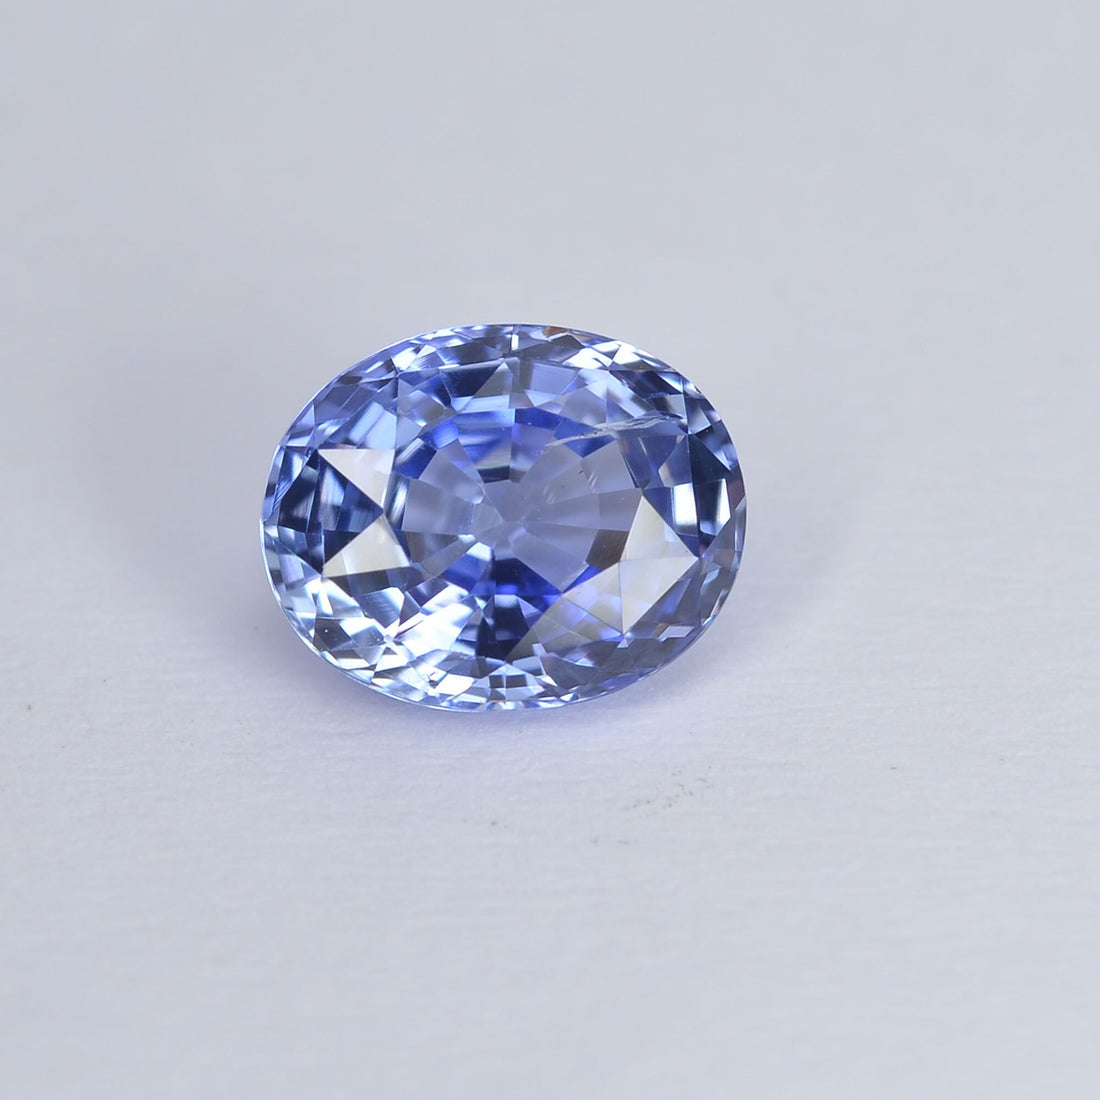 1.45cts Unheated Natural Blue Sapphire Loose Gemstone Oval Cut Certified